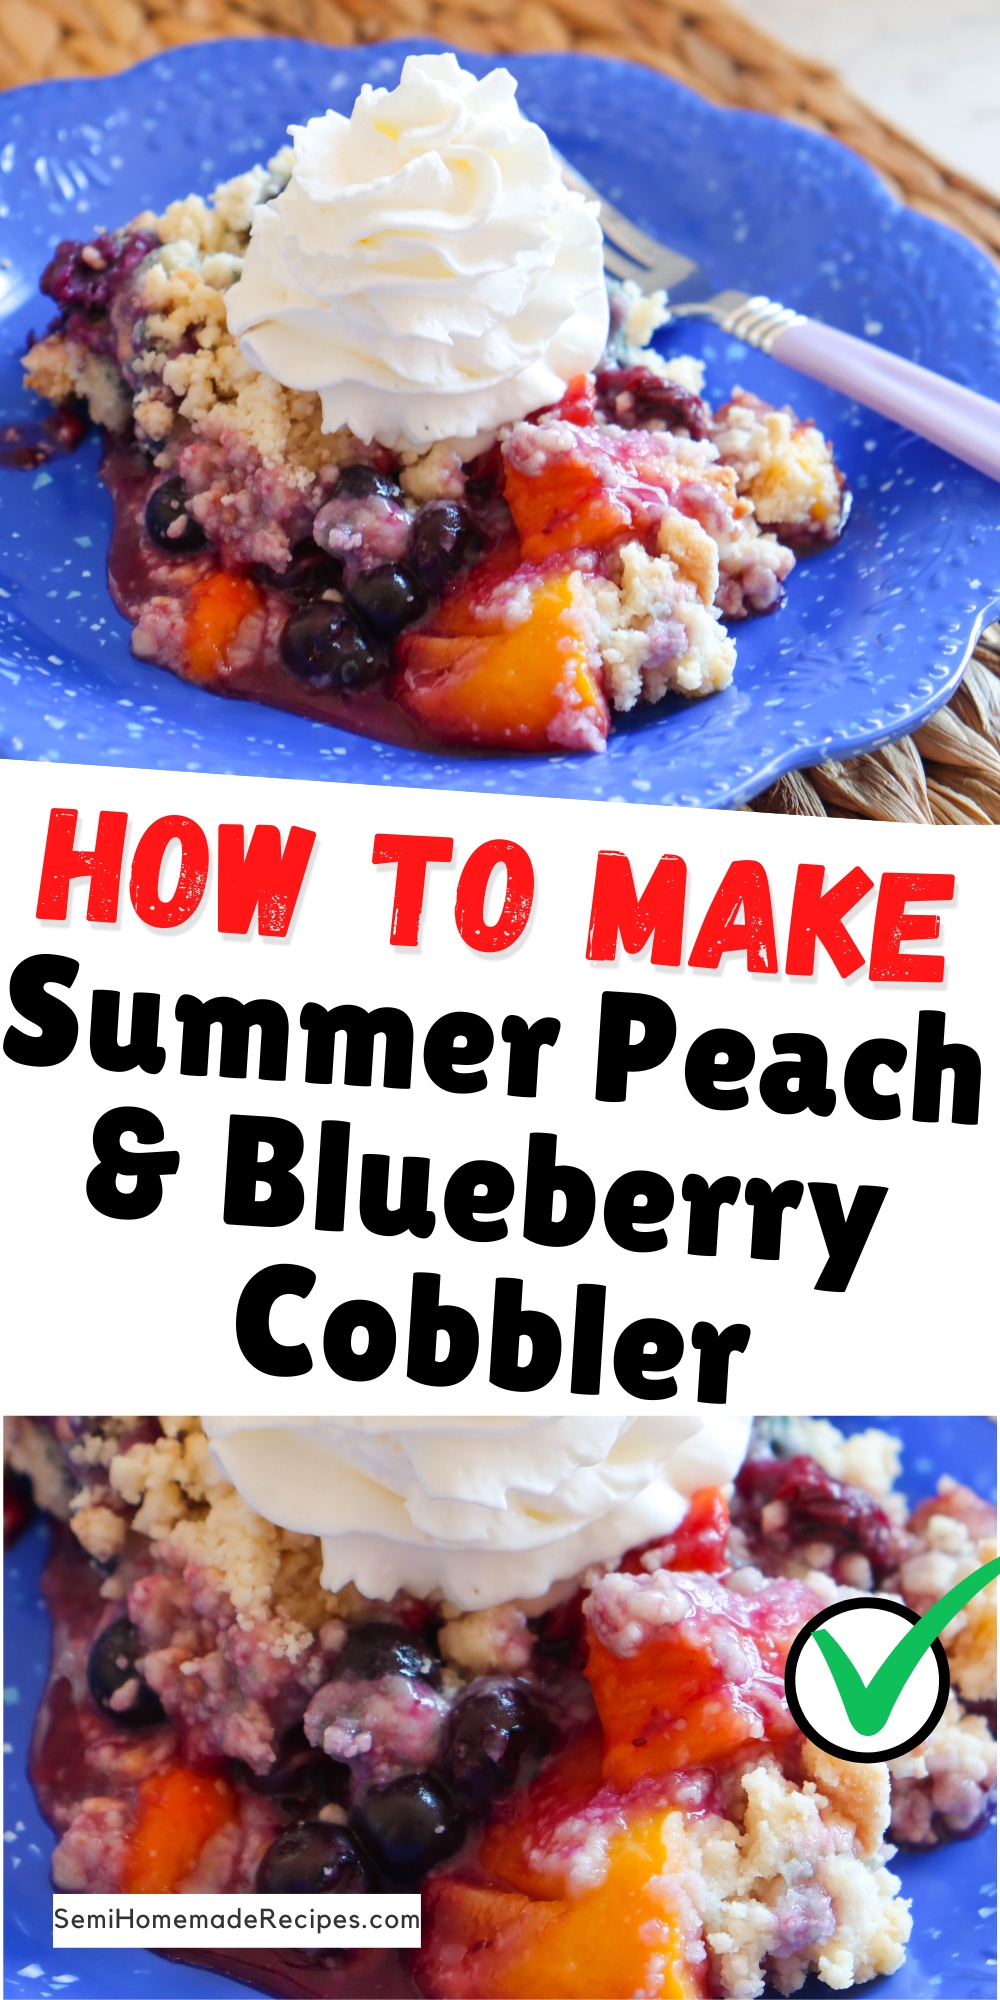 Capture the essence of summer with this irresistible peach and blueberry cobbler recipe. From the sweet and juicy peaches to the tart and tangy blueberries, every bite is a burst of flavor that will transport you to a warm summer day. Learn how to make it today and savor the taste of summer.